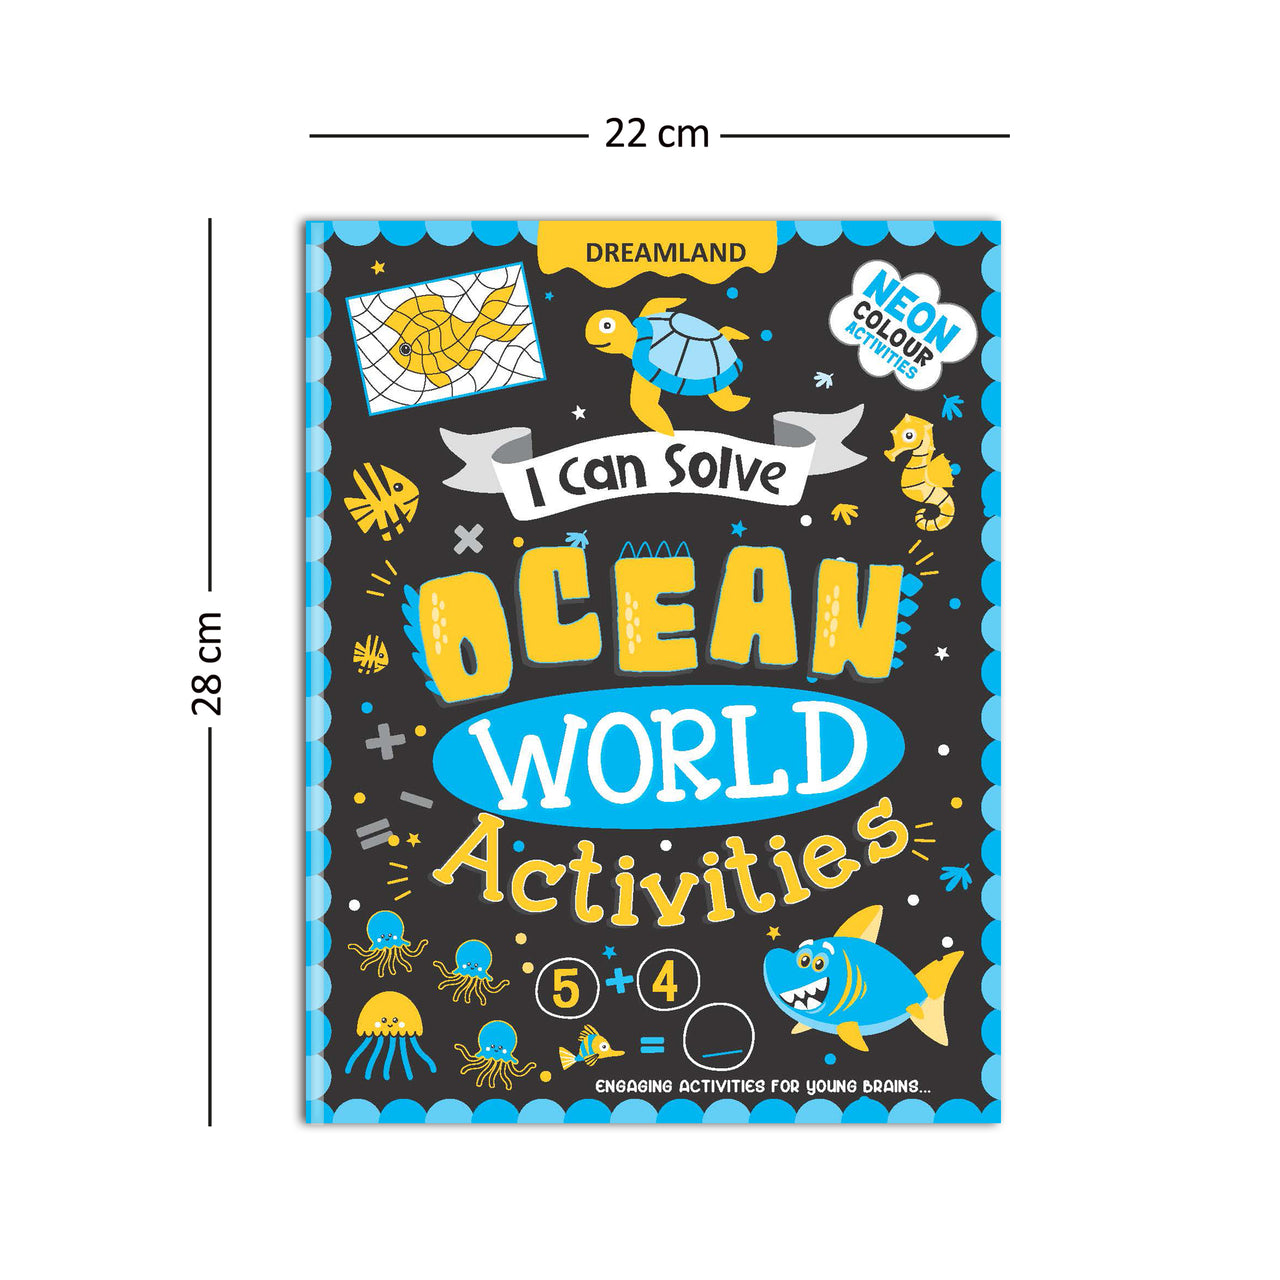 Dreamland Publications Ocean World Activities - I Can Solve Activity Book for Kids Age 4- 8 Years | With Colouring Pages, Mazes, Dot-to-Dots - Distacart